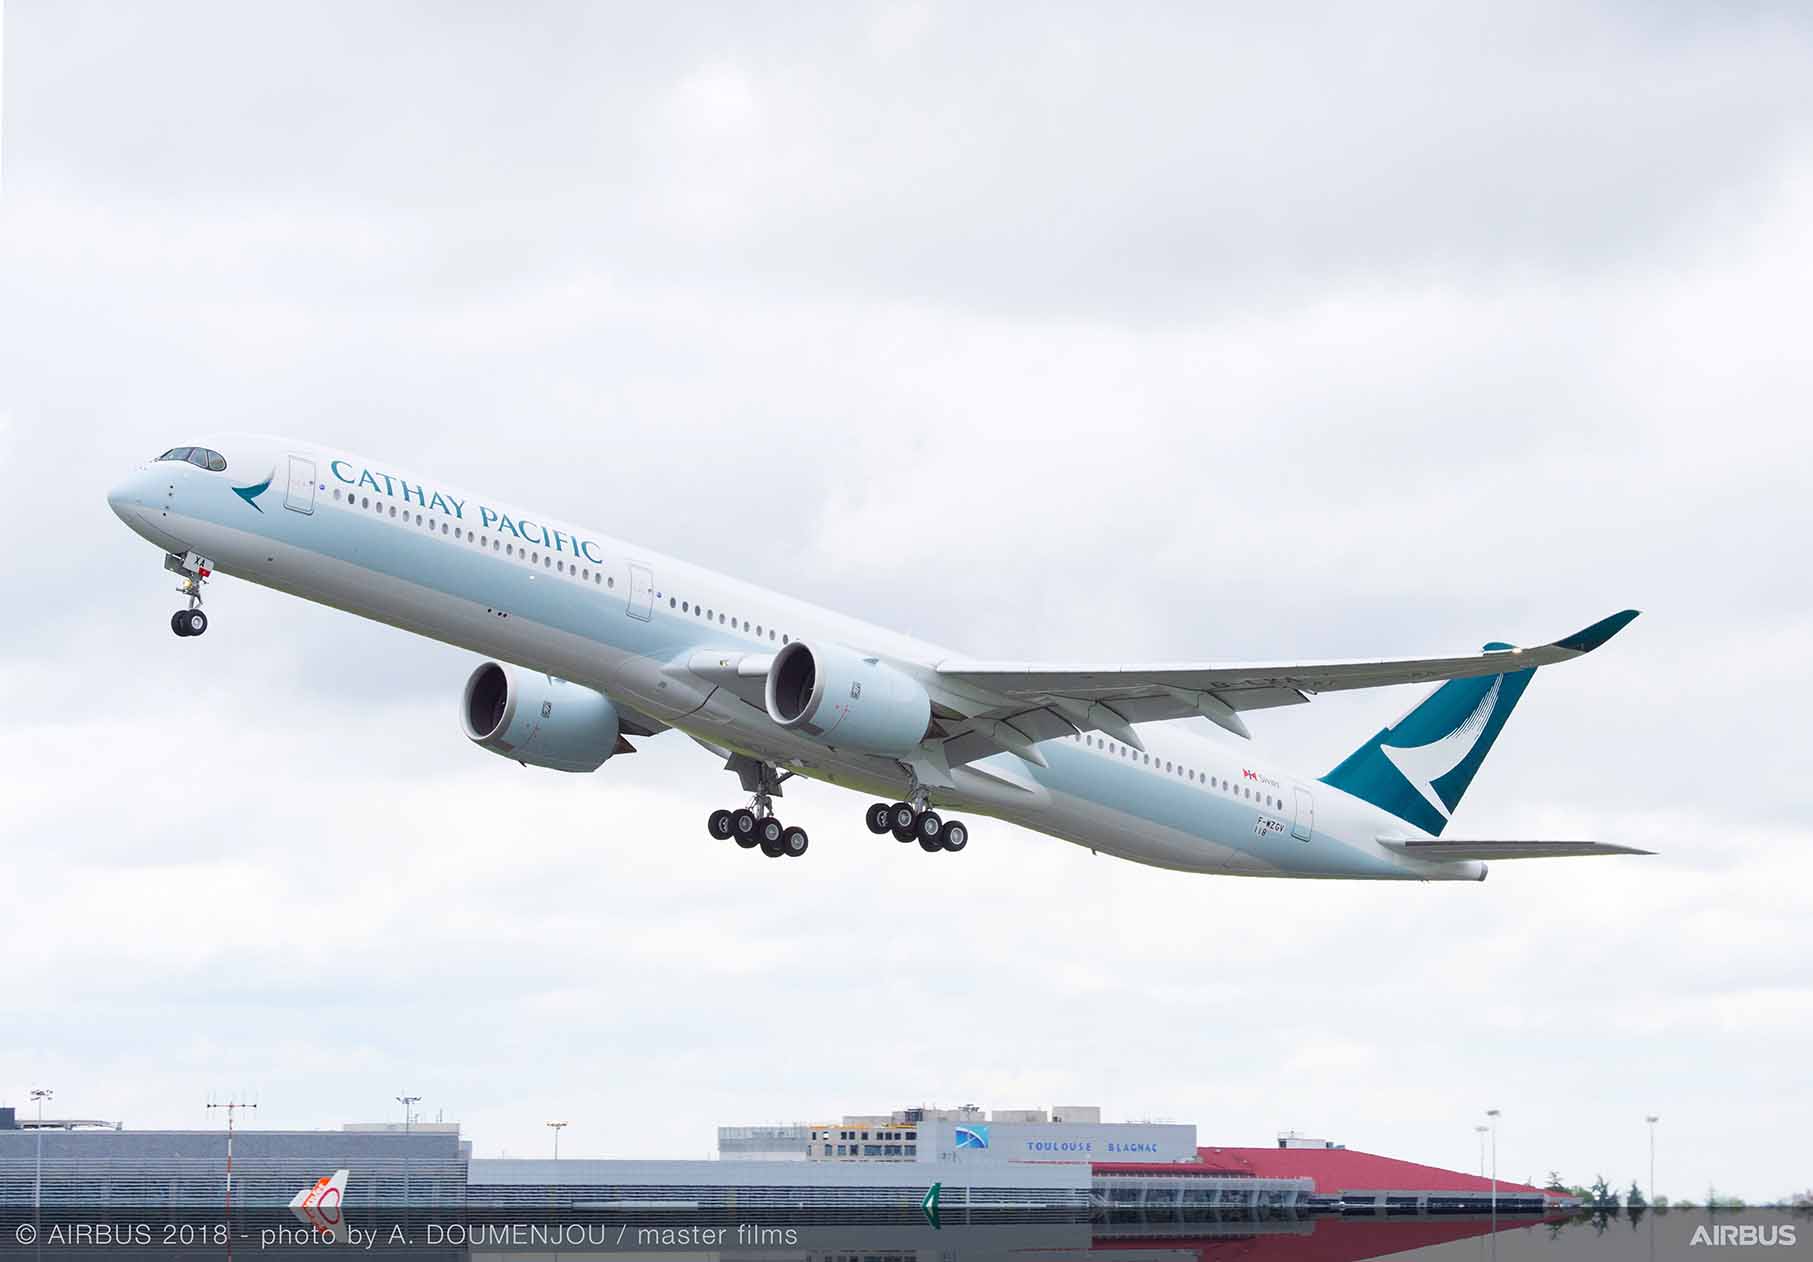 Cathay Pacific reports positive passenger traffic for February 2023